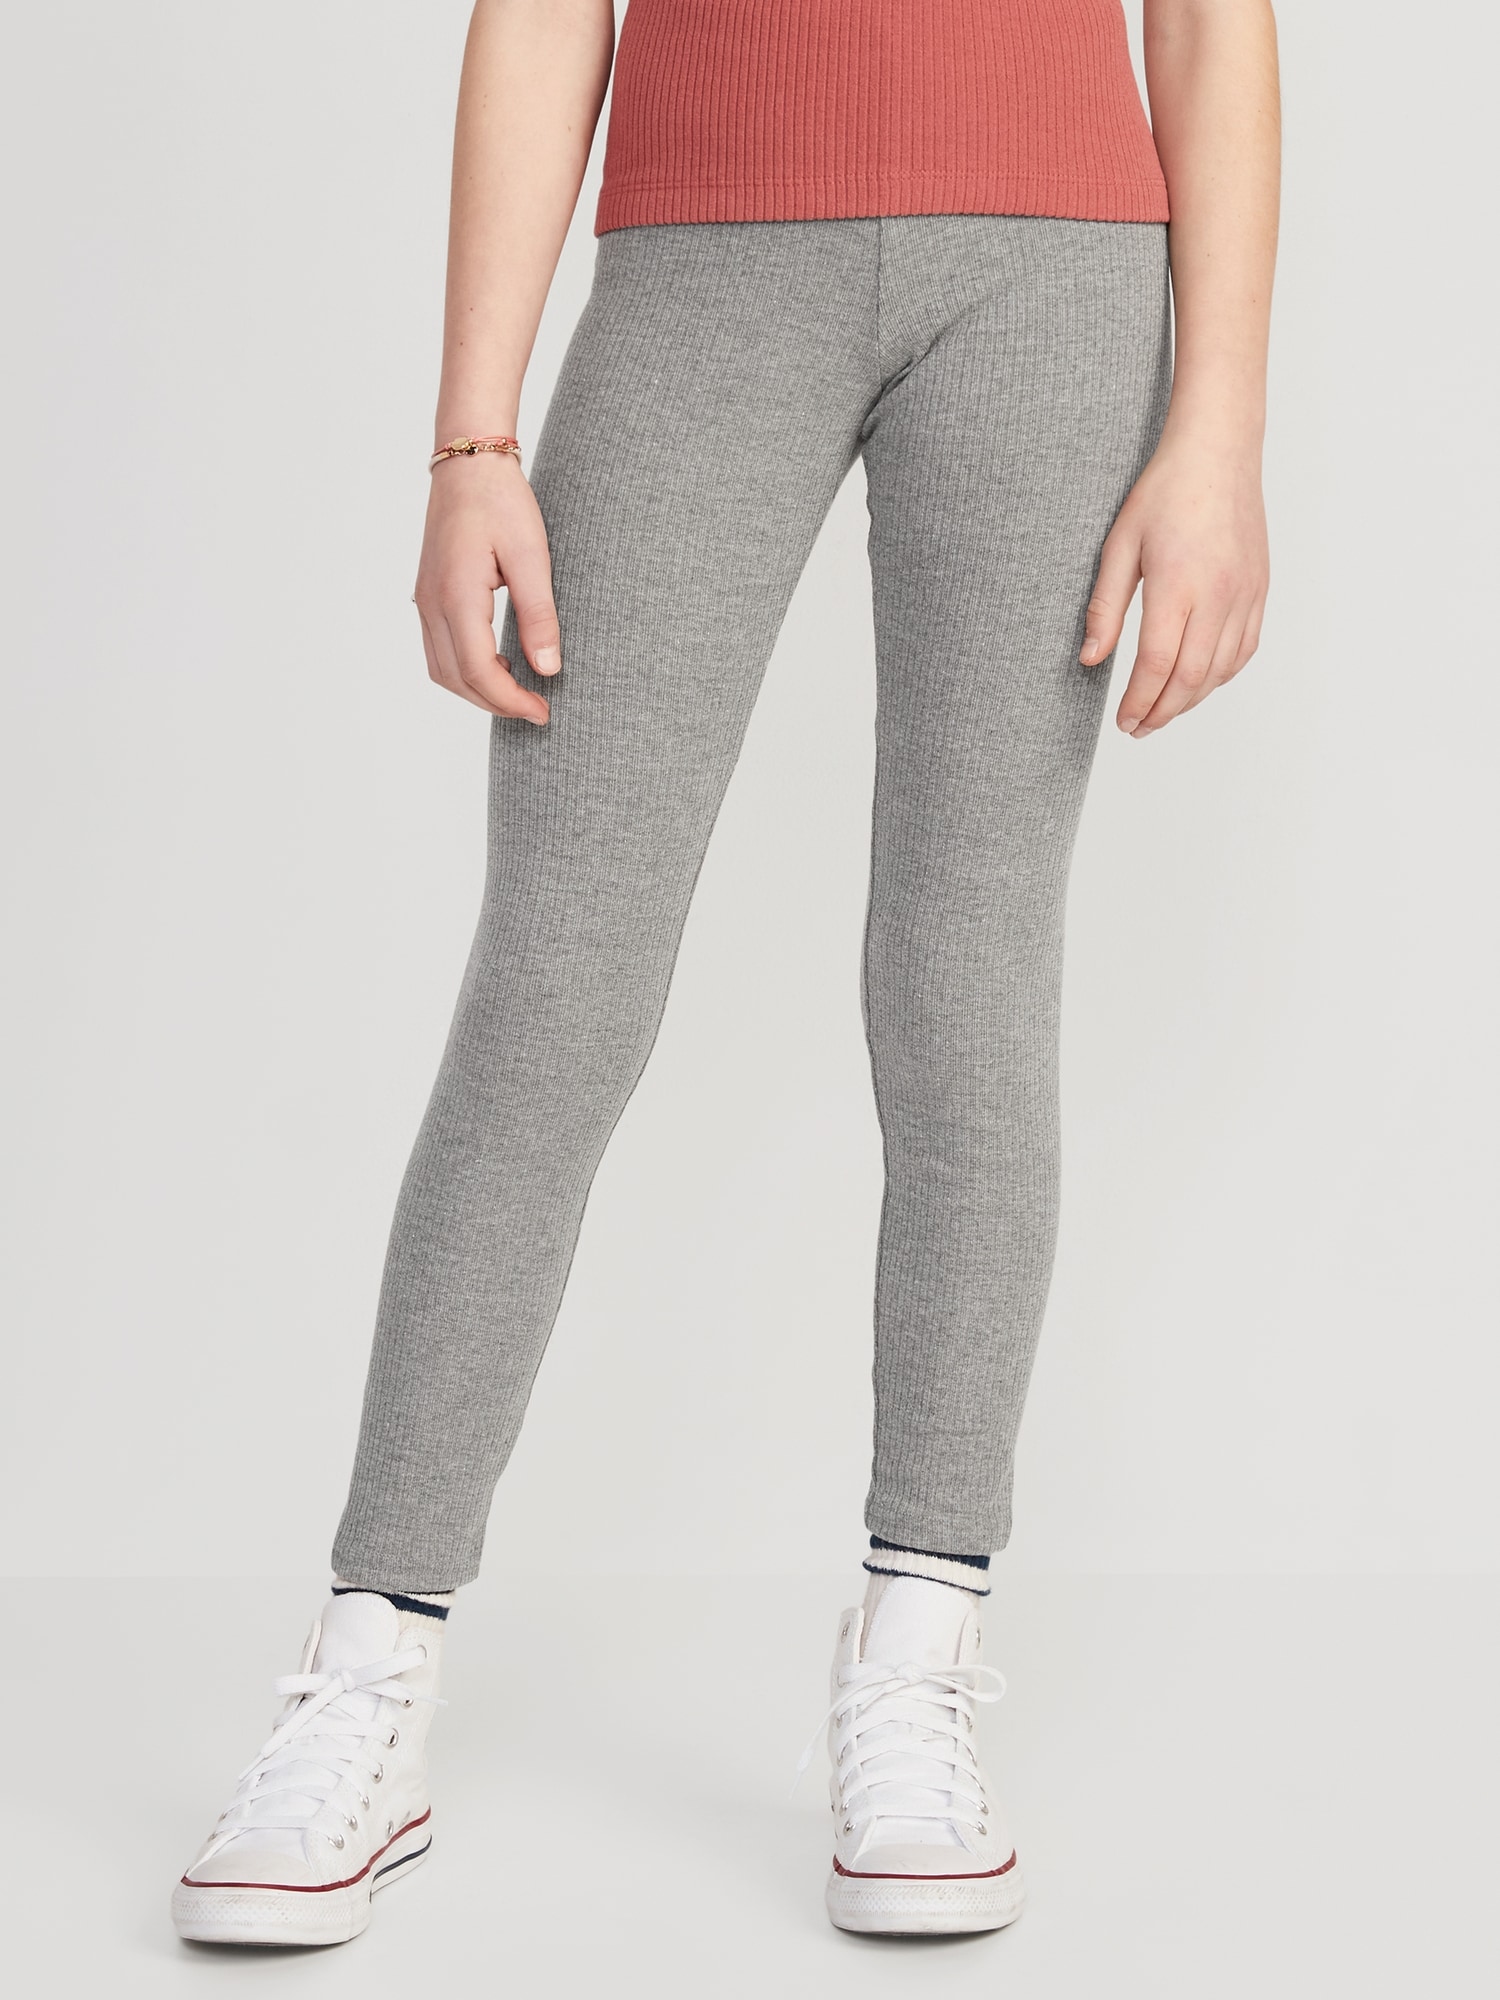 Ribbed Knit Leggings - Heather